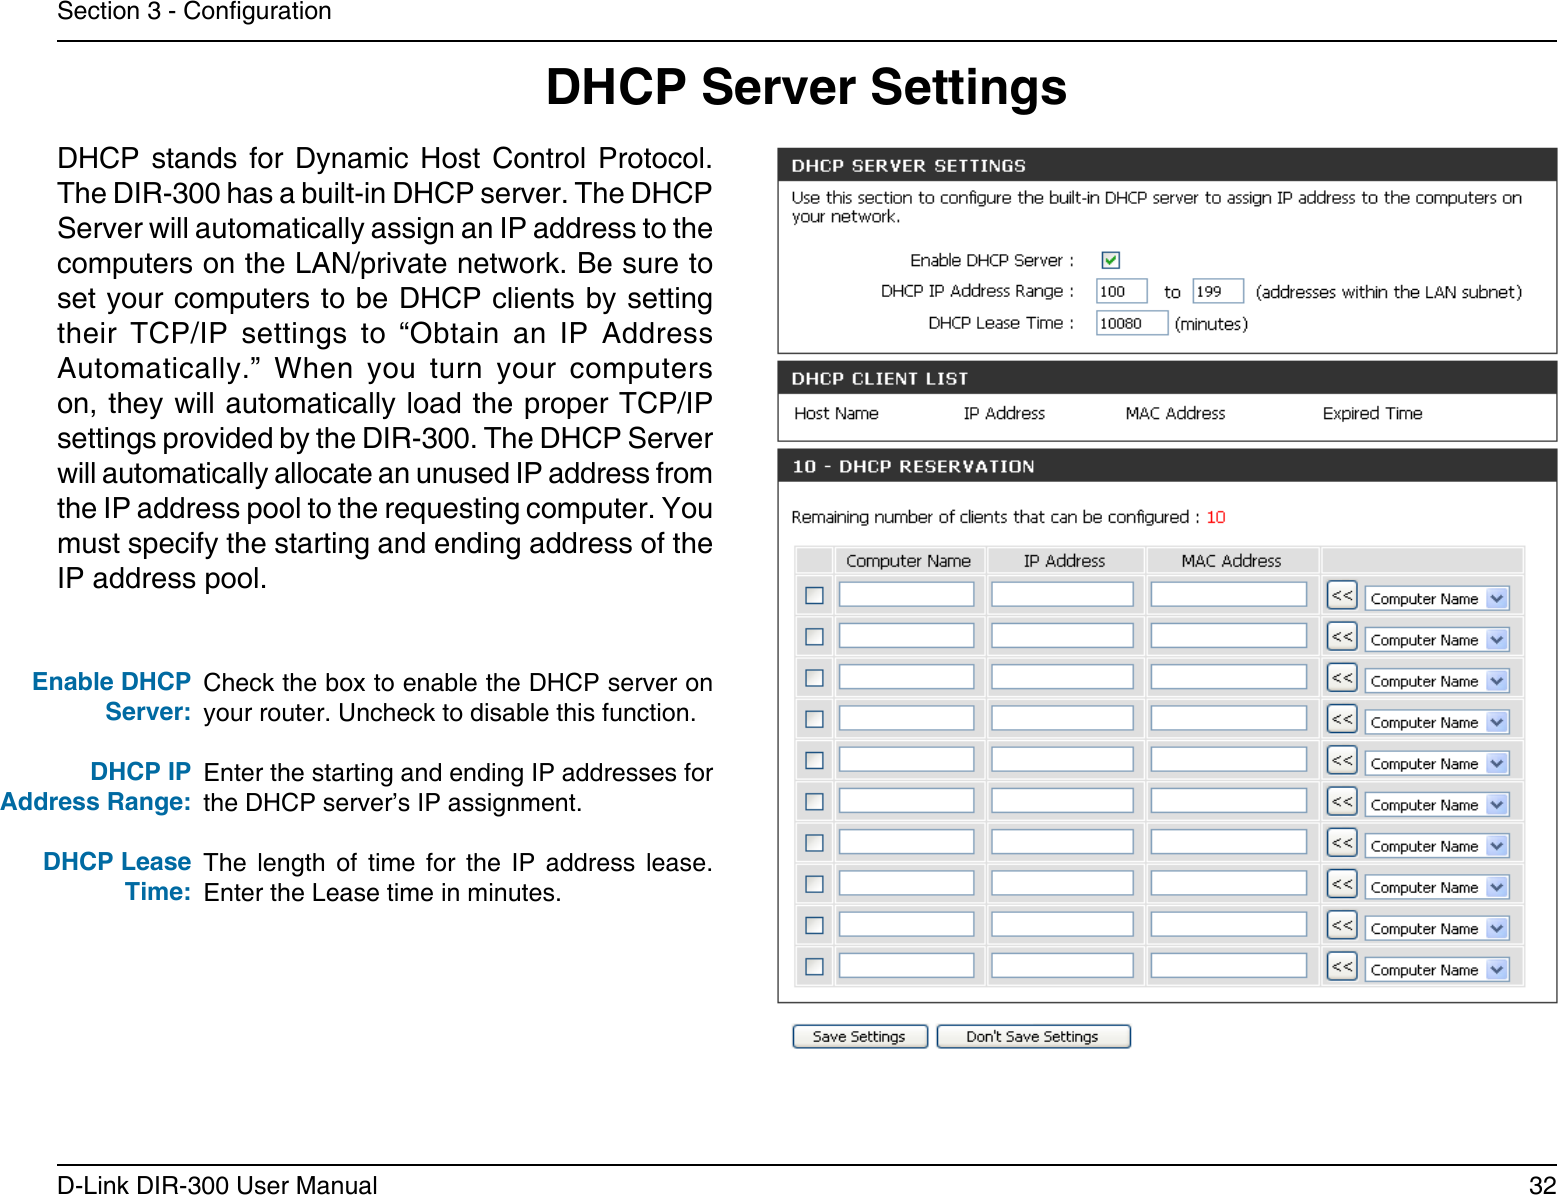 32D-Link DIR-300 User ManualSection 3 - CongurationCheck the box to enable the DHCP server on your router. Uncheck to disable this function.Enter the starting and ending IP addresses for the DHCP server’s IP assignment.The  length  of  time  for  the  IP  address  lease. Enter the Lease time in minutes.Enable DHCP Server:DHCP IPAddress Range:DHCP Lease Time:DHCP Server SettingsDHCP  stands  for  Dynamic  Host  Control  Protocol. The DIR-300 has a built-in DHCP server. The DHCP Server will automatically assign an IP address to the computers on the LAN/private network. Be sure to set your computers to be DHCP clients by setting their  TCP/IP  settings  to  “Obtain  an  IP  Address Automatically.”  When  you  turn  your  computers on, they will automatically load the proper TCP/IP settings provided by the DIR-300. The DHCP Server will automatically allocate an unused IP address from the IP address pool to the requesting computer. You must specify the starting and ending address of the IP address pool.